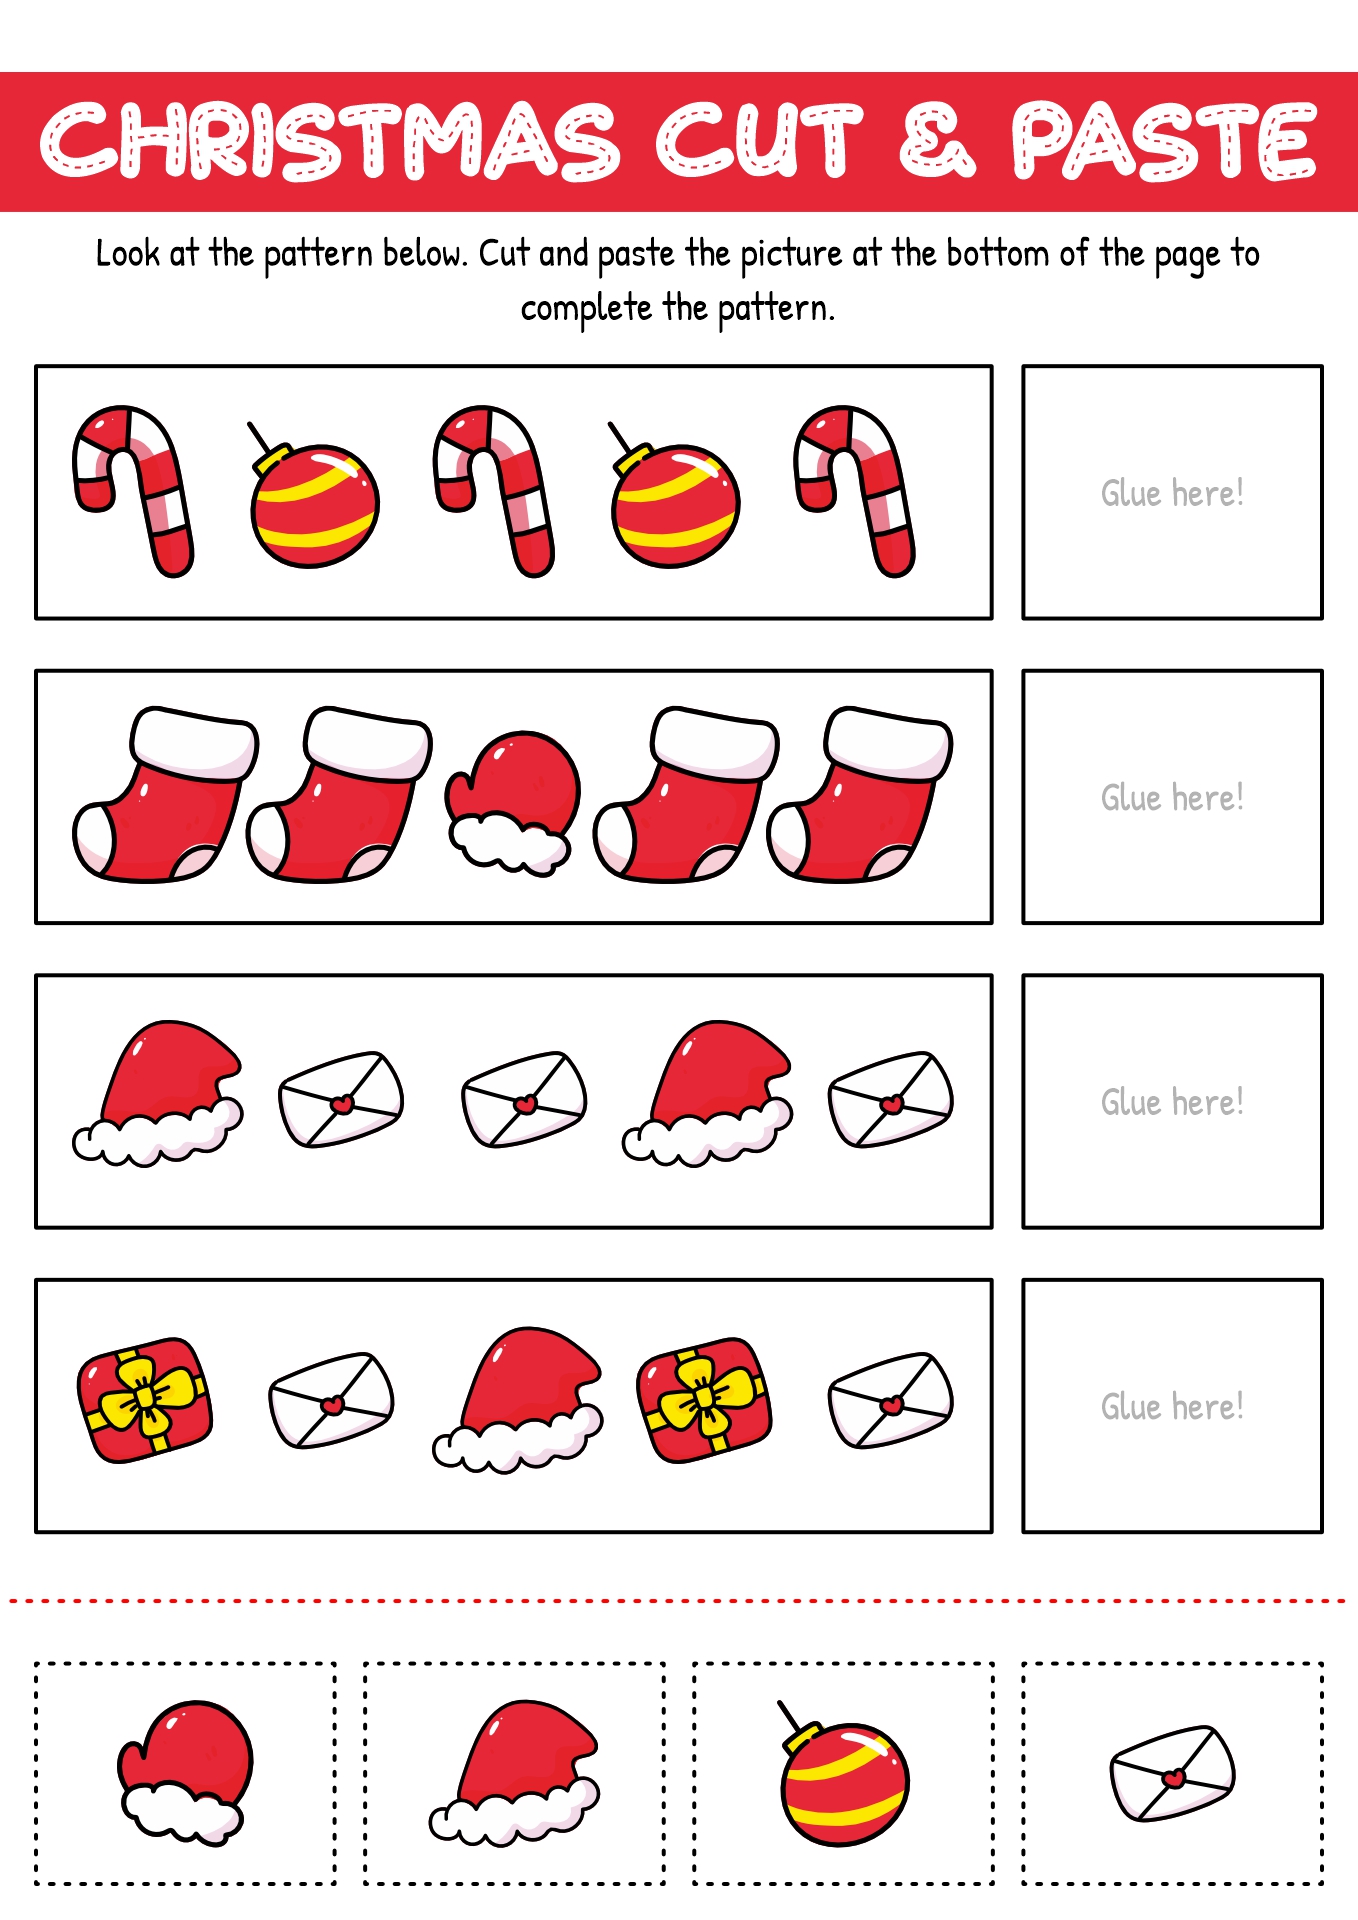 cut-and-paste-christmas-worksheets